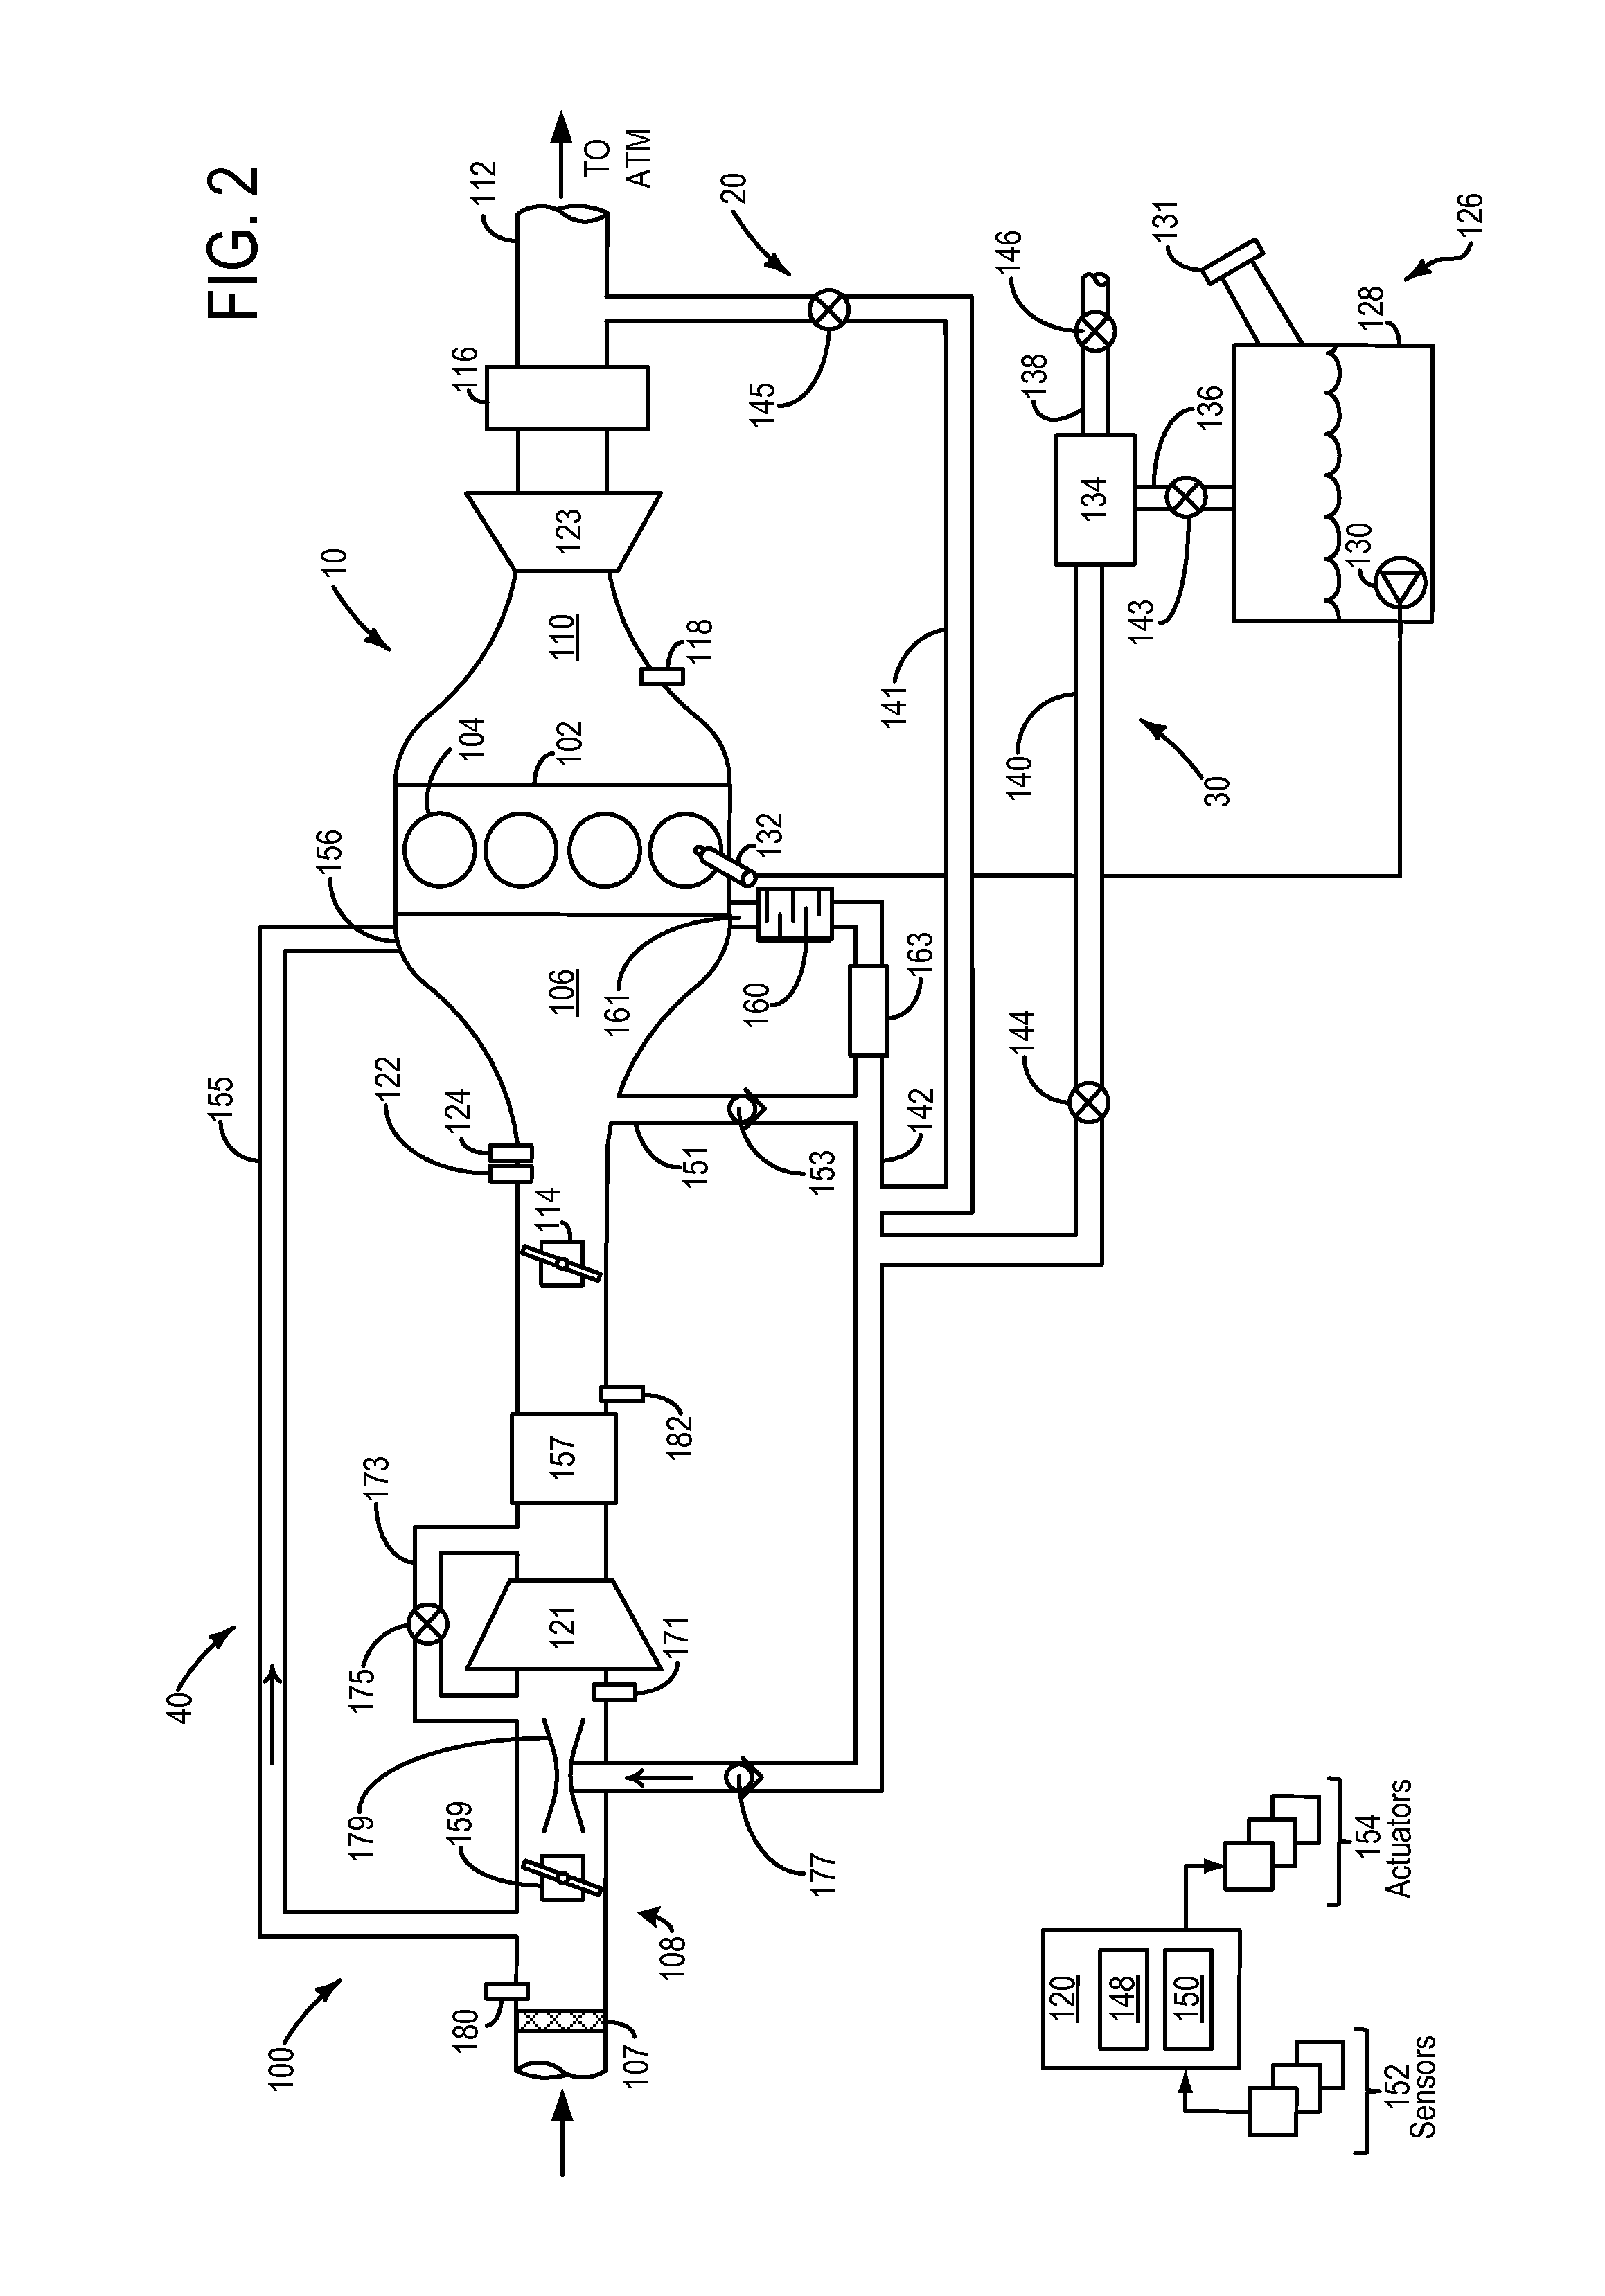 System and method for gas purge control